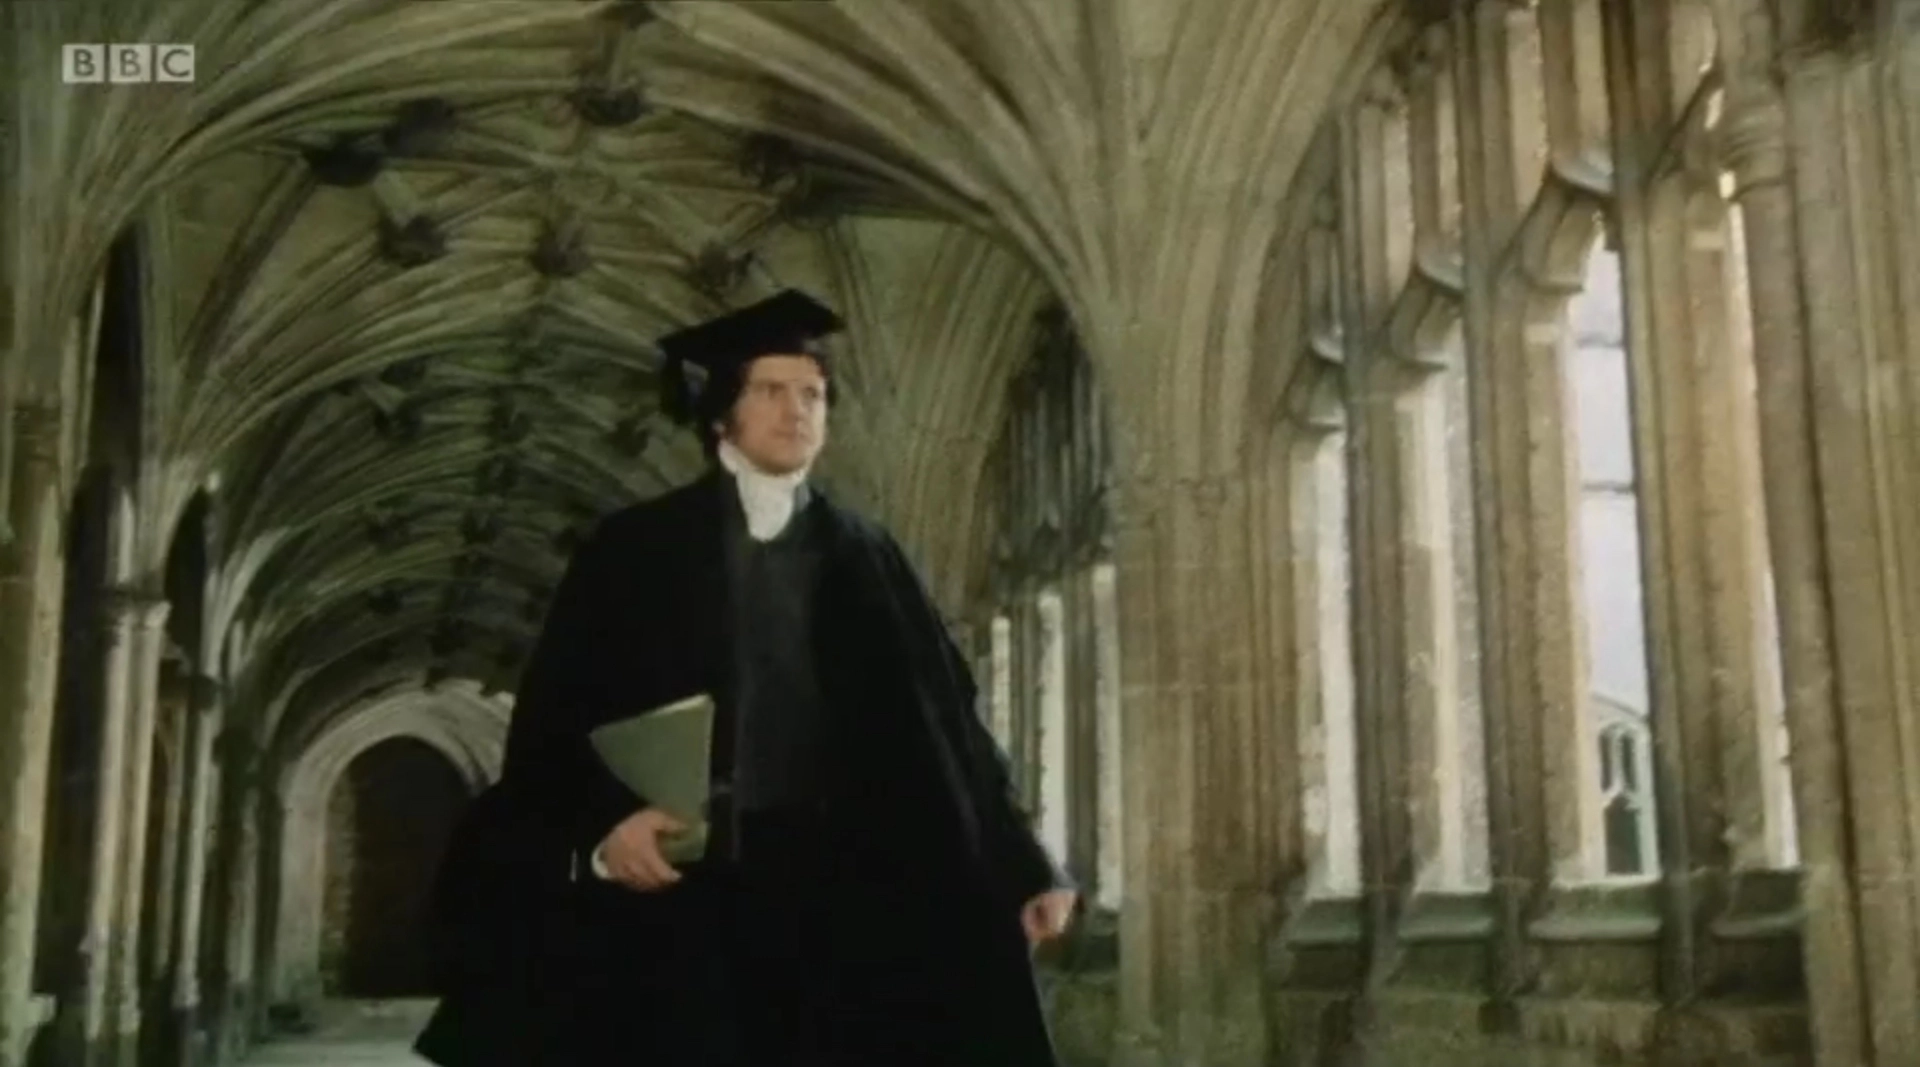 Colin Firth as Mark Darcy in Oxford dress robes in a grand hallway with large arches.